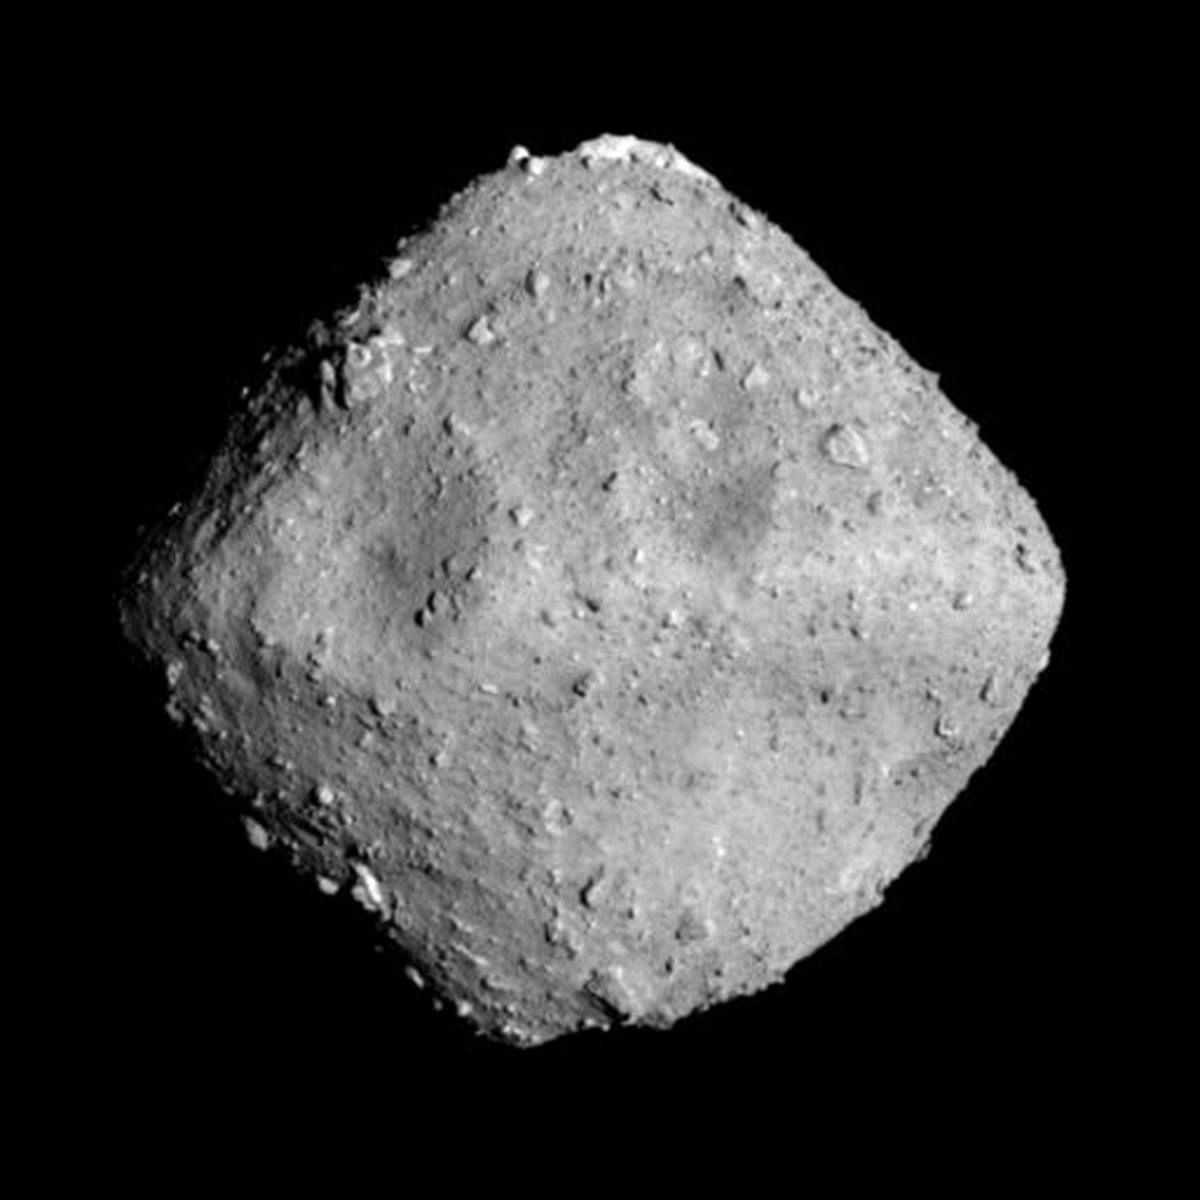 The probe is expected to touch down Thursday on the Ryugu asteroid, some 300 million kilometres (185 million miles) from Earth. (AFP File Photo)